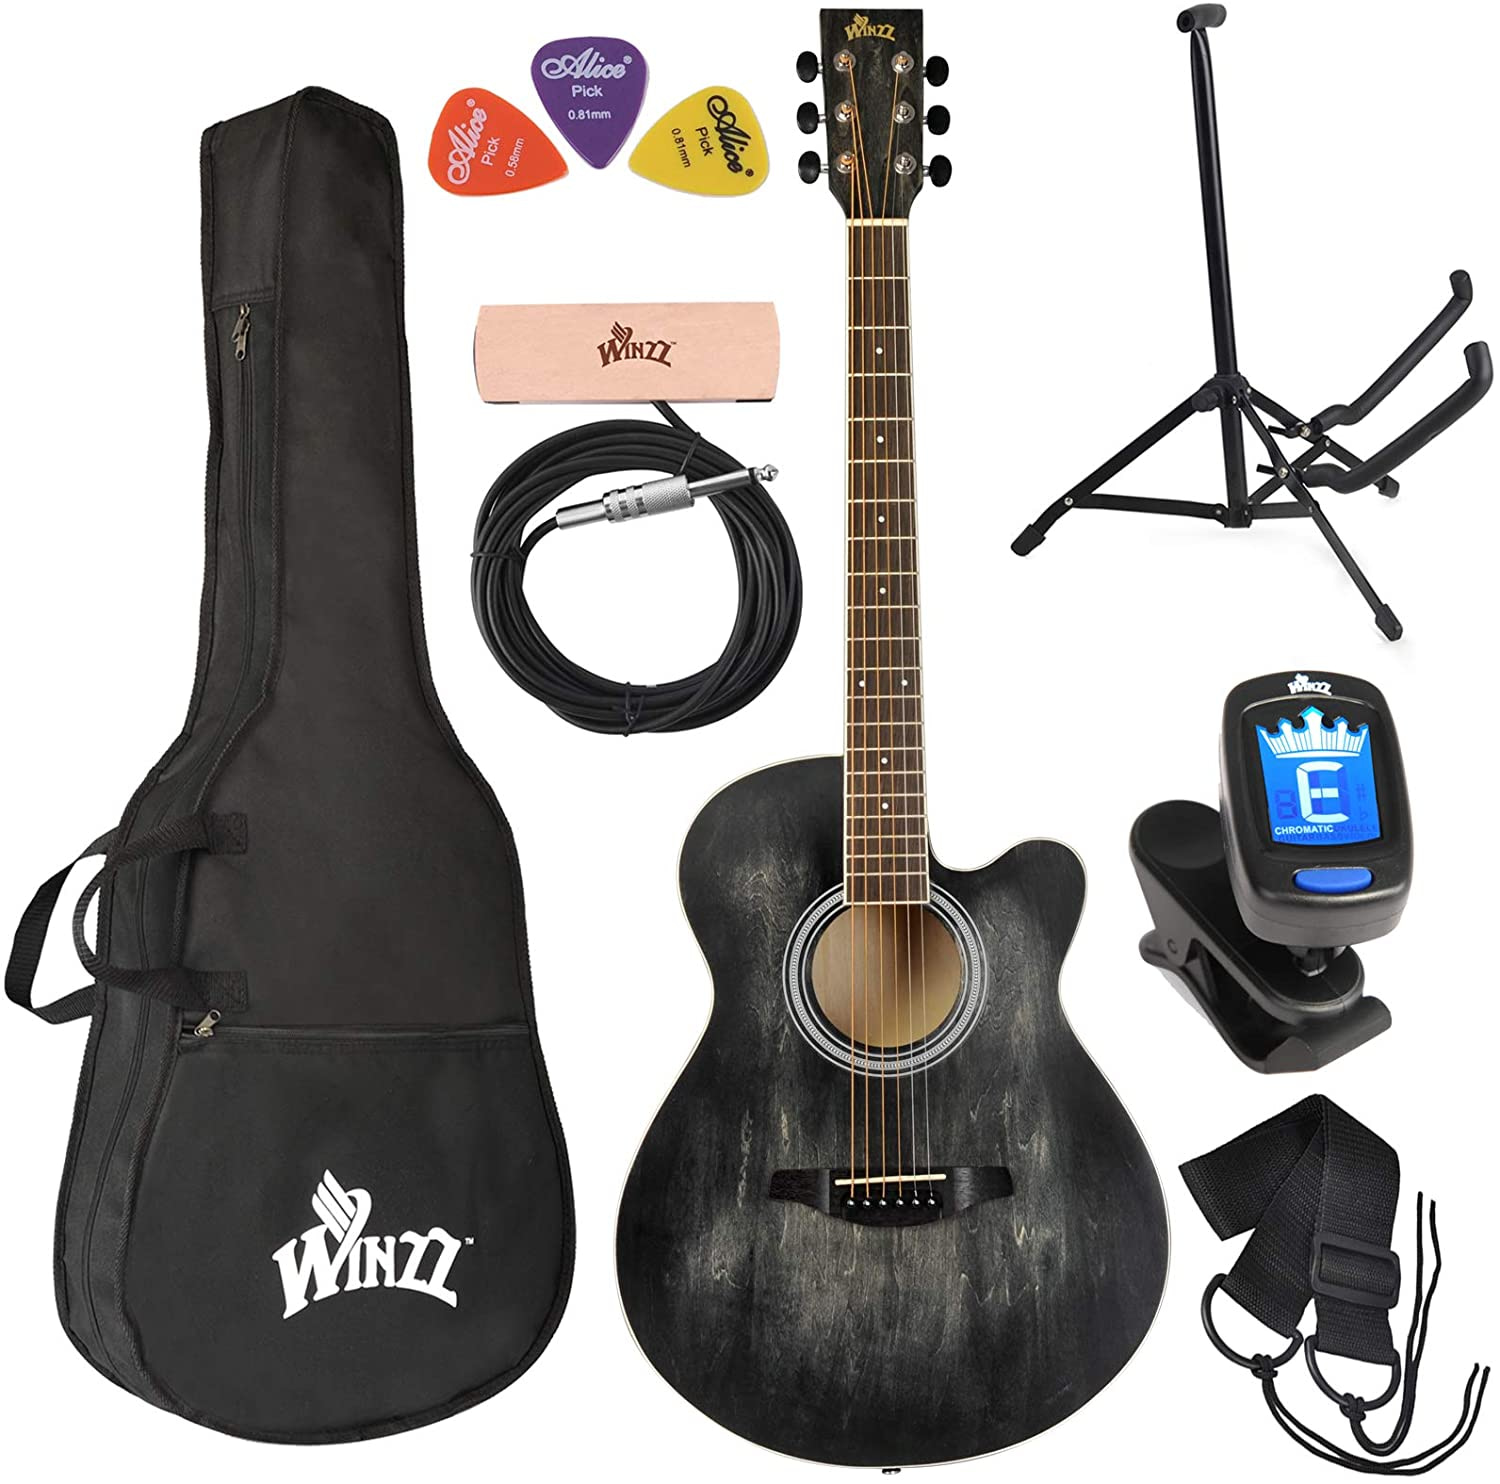 WINZZ 3/4 Dreadnought Acoustic Guitar Bundle with Online Lessons, Bag, Metronome Tuner, Wall-mounted Hanger, Strap, Picks & Cleaning Cloth,36 Inches Right Handed, Dark Hunter Green 17